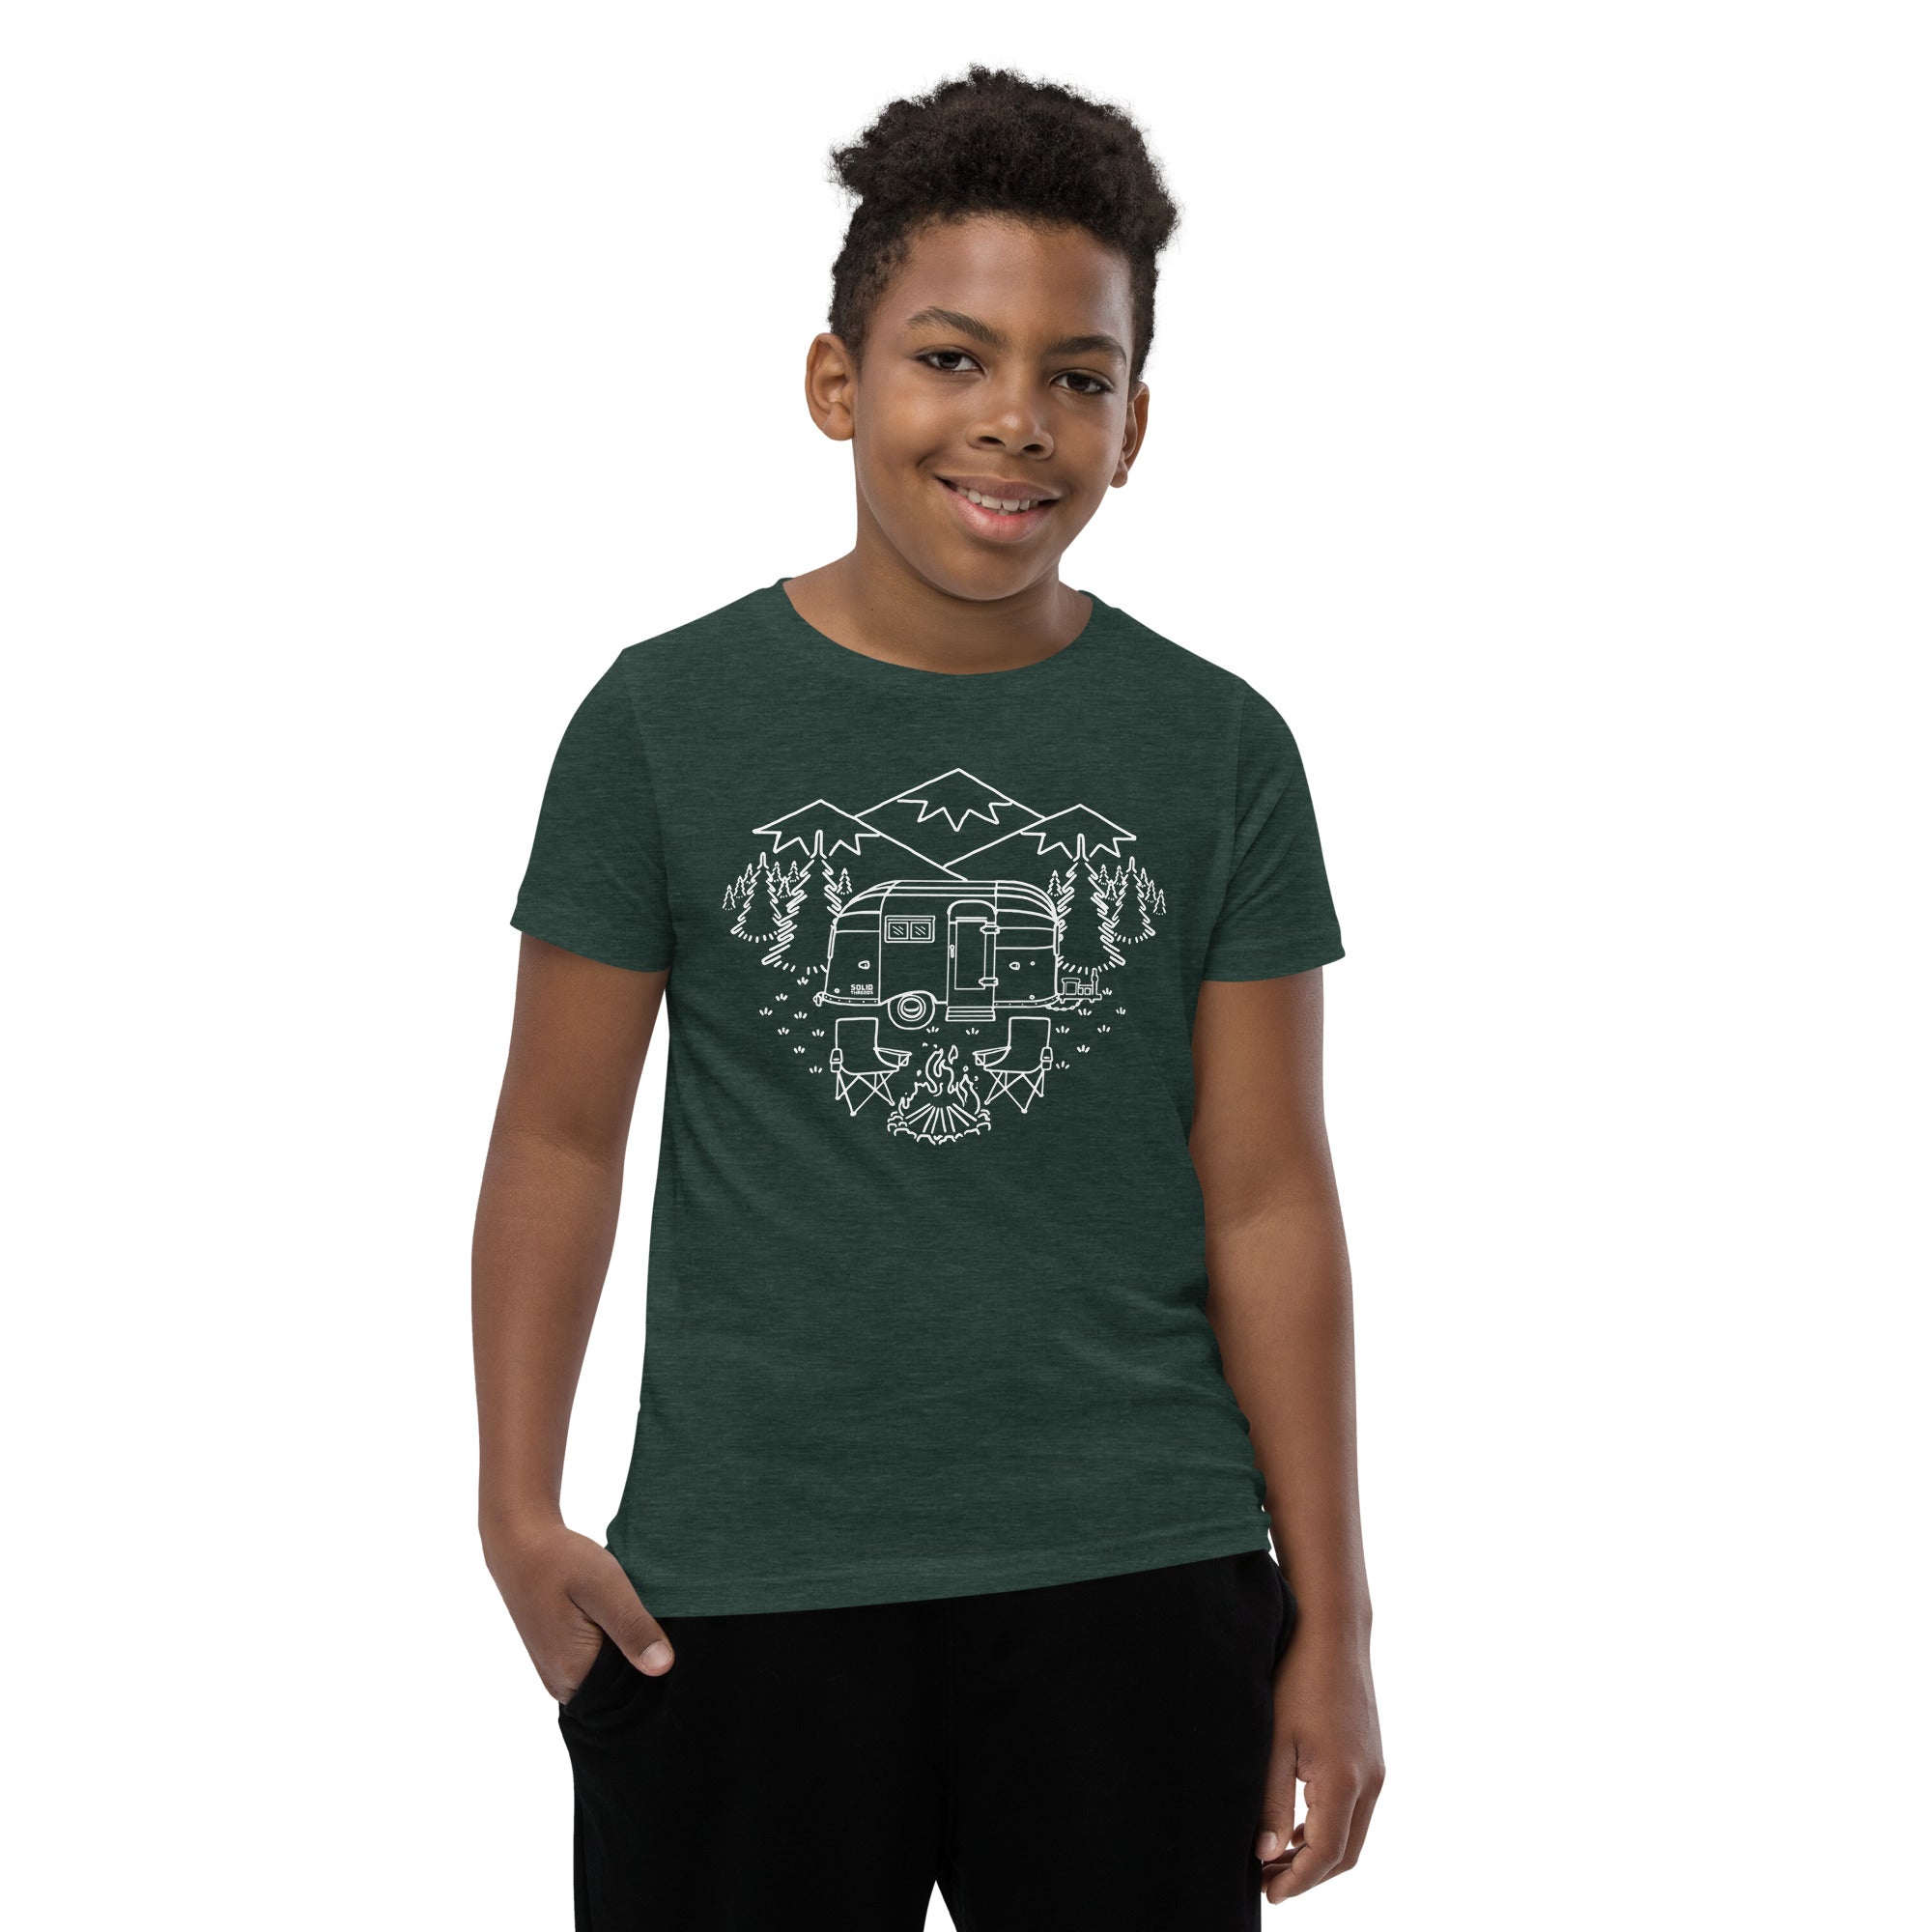 Youth Camp Site Retro Hiking Extra Soft T-Shirt | Cool Mountains Kids Tee Boy Model | Solid Threads